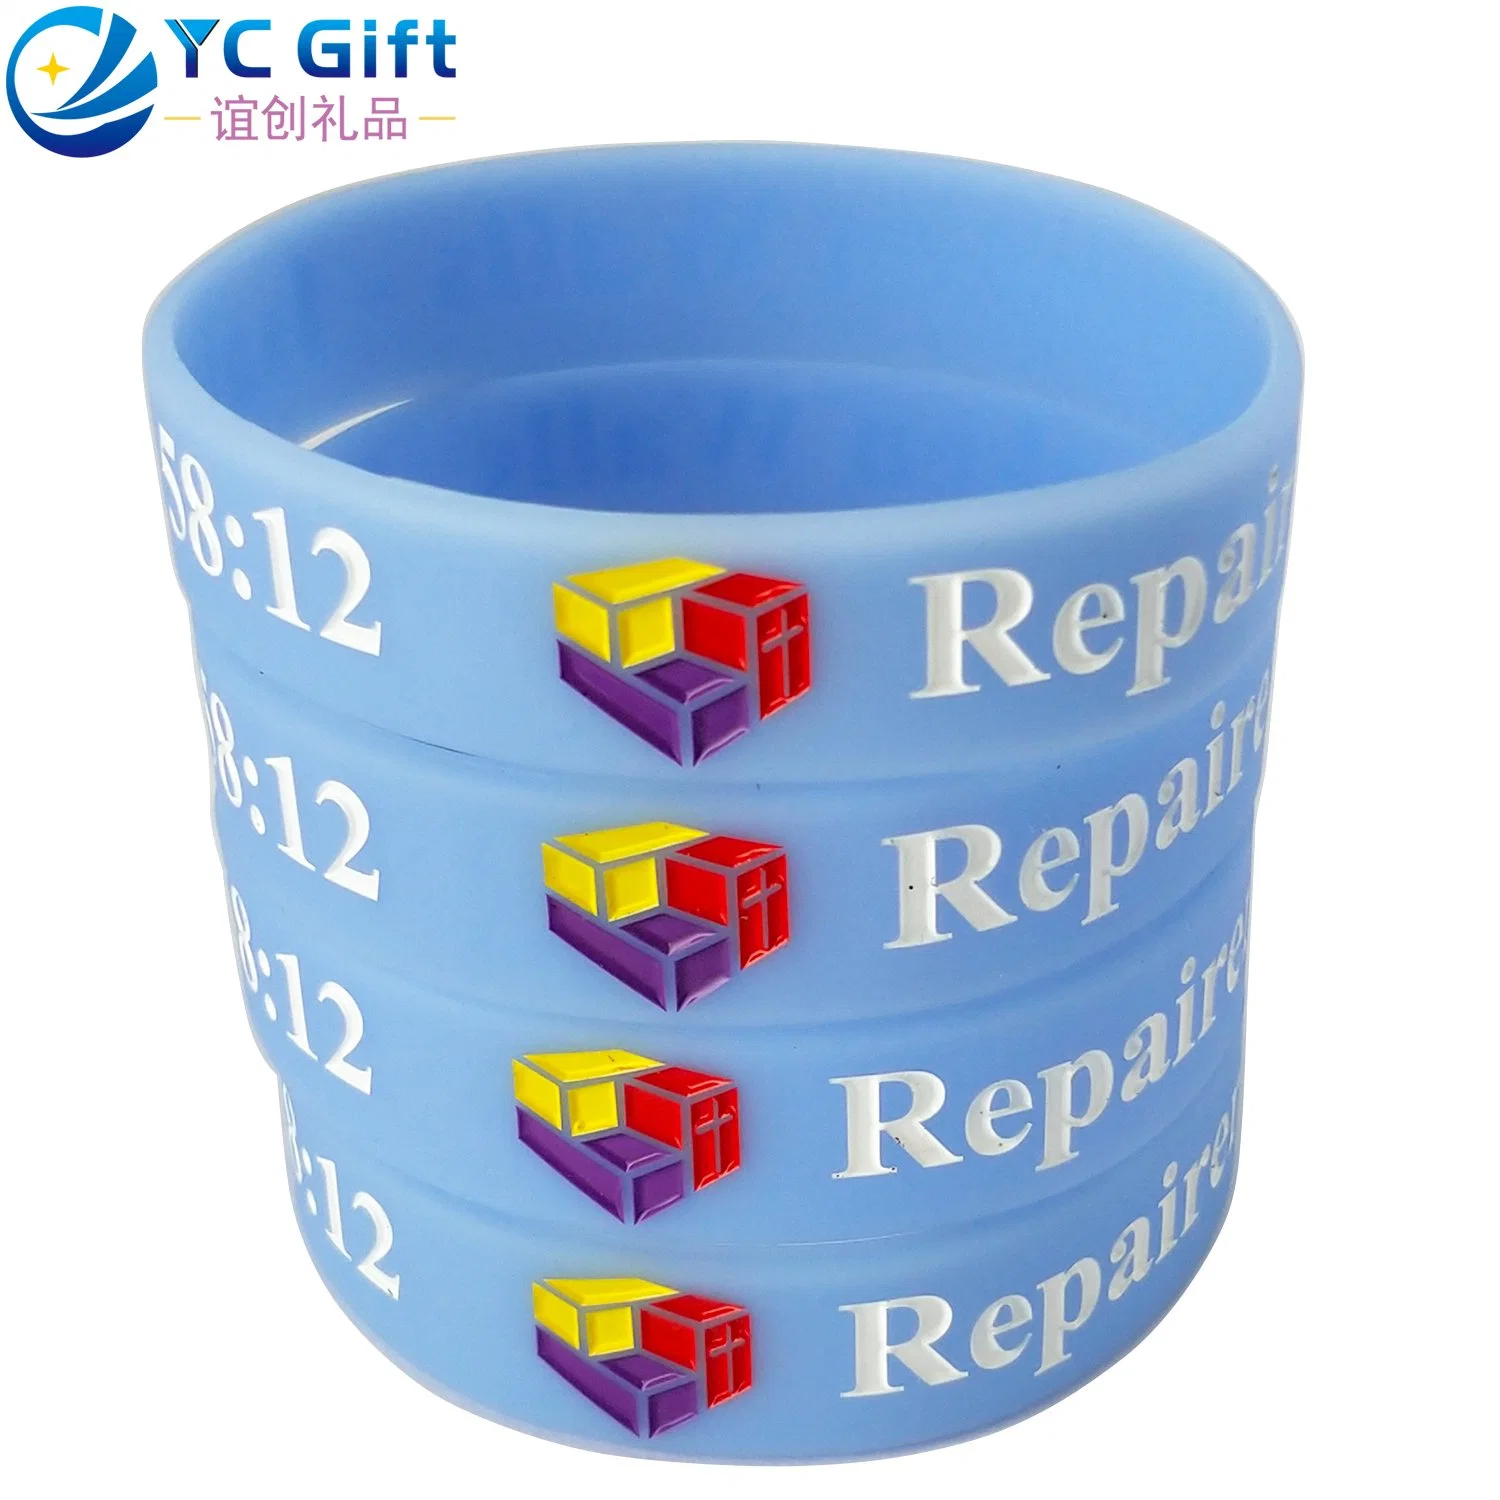 Wholesale Custom Colorful Deboss Logo Sport Products Silicone Energy Bracelet Personalized Corporate Team Activity Travel Promotion Gift PVC Rubber Wristband